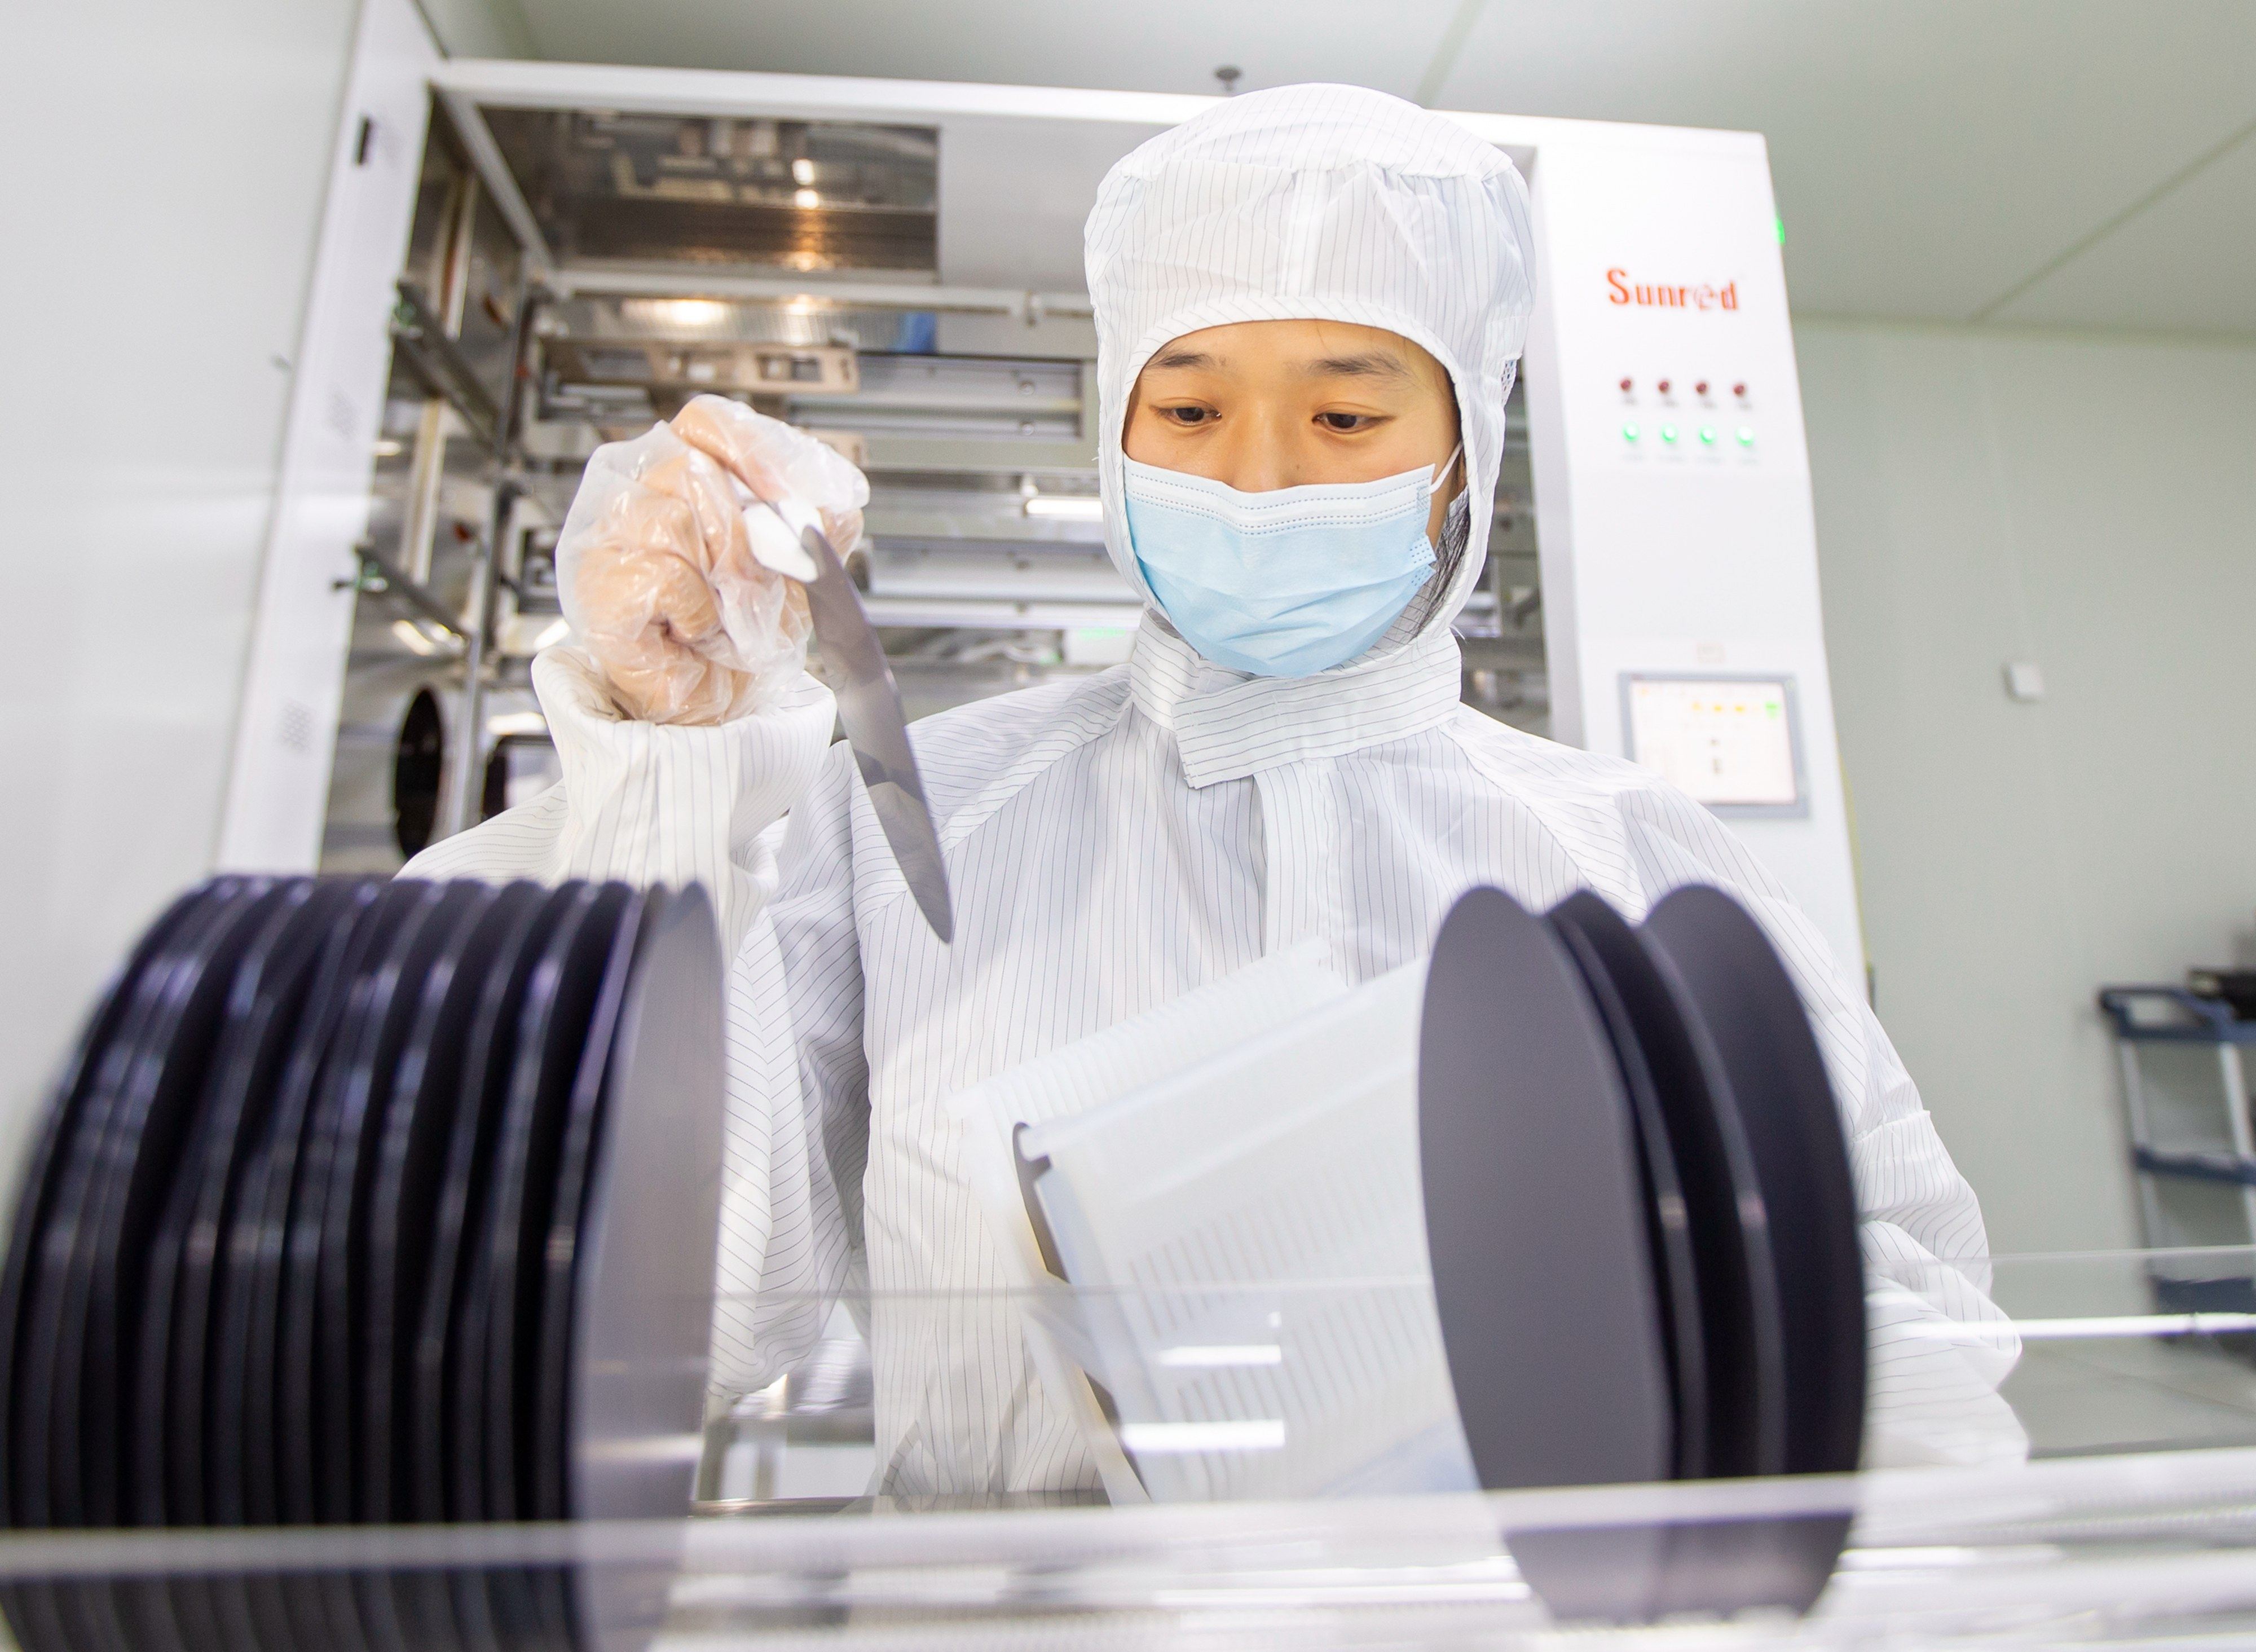 An employee produces semiconductor wafers at a microelectronics enterprise in Hai’an, Jiangsu province, China, on March 23, 2023. Photo: Getty Images